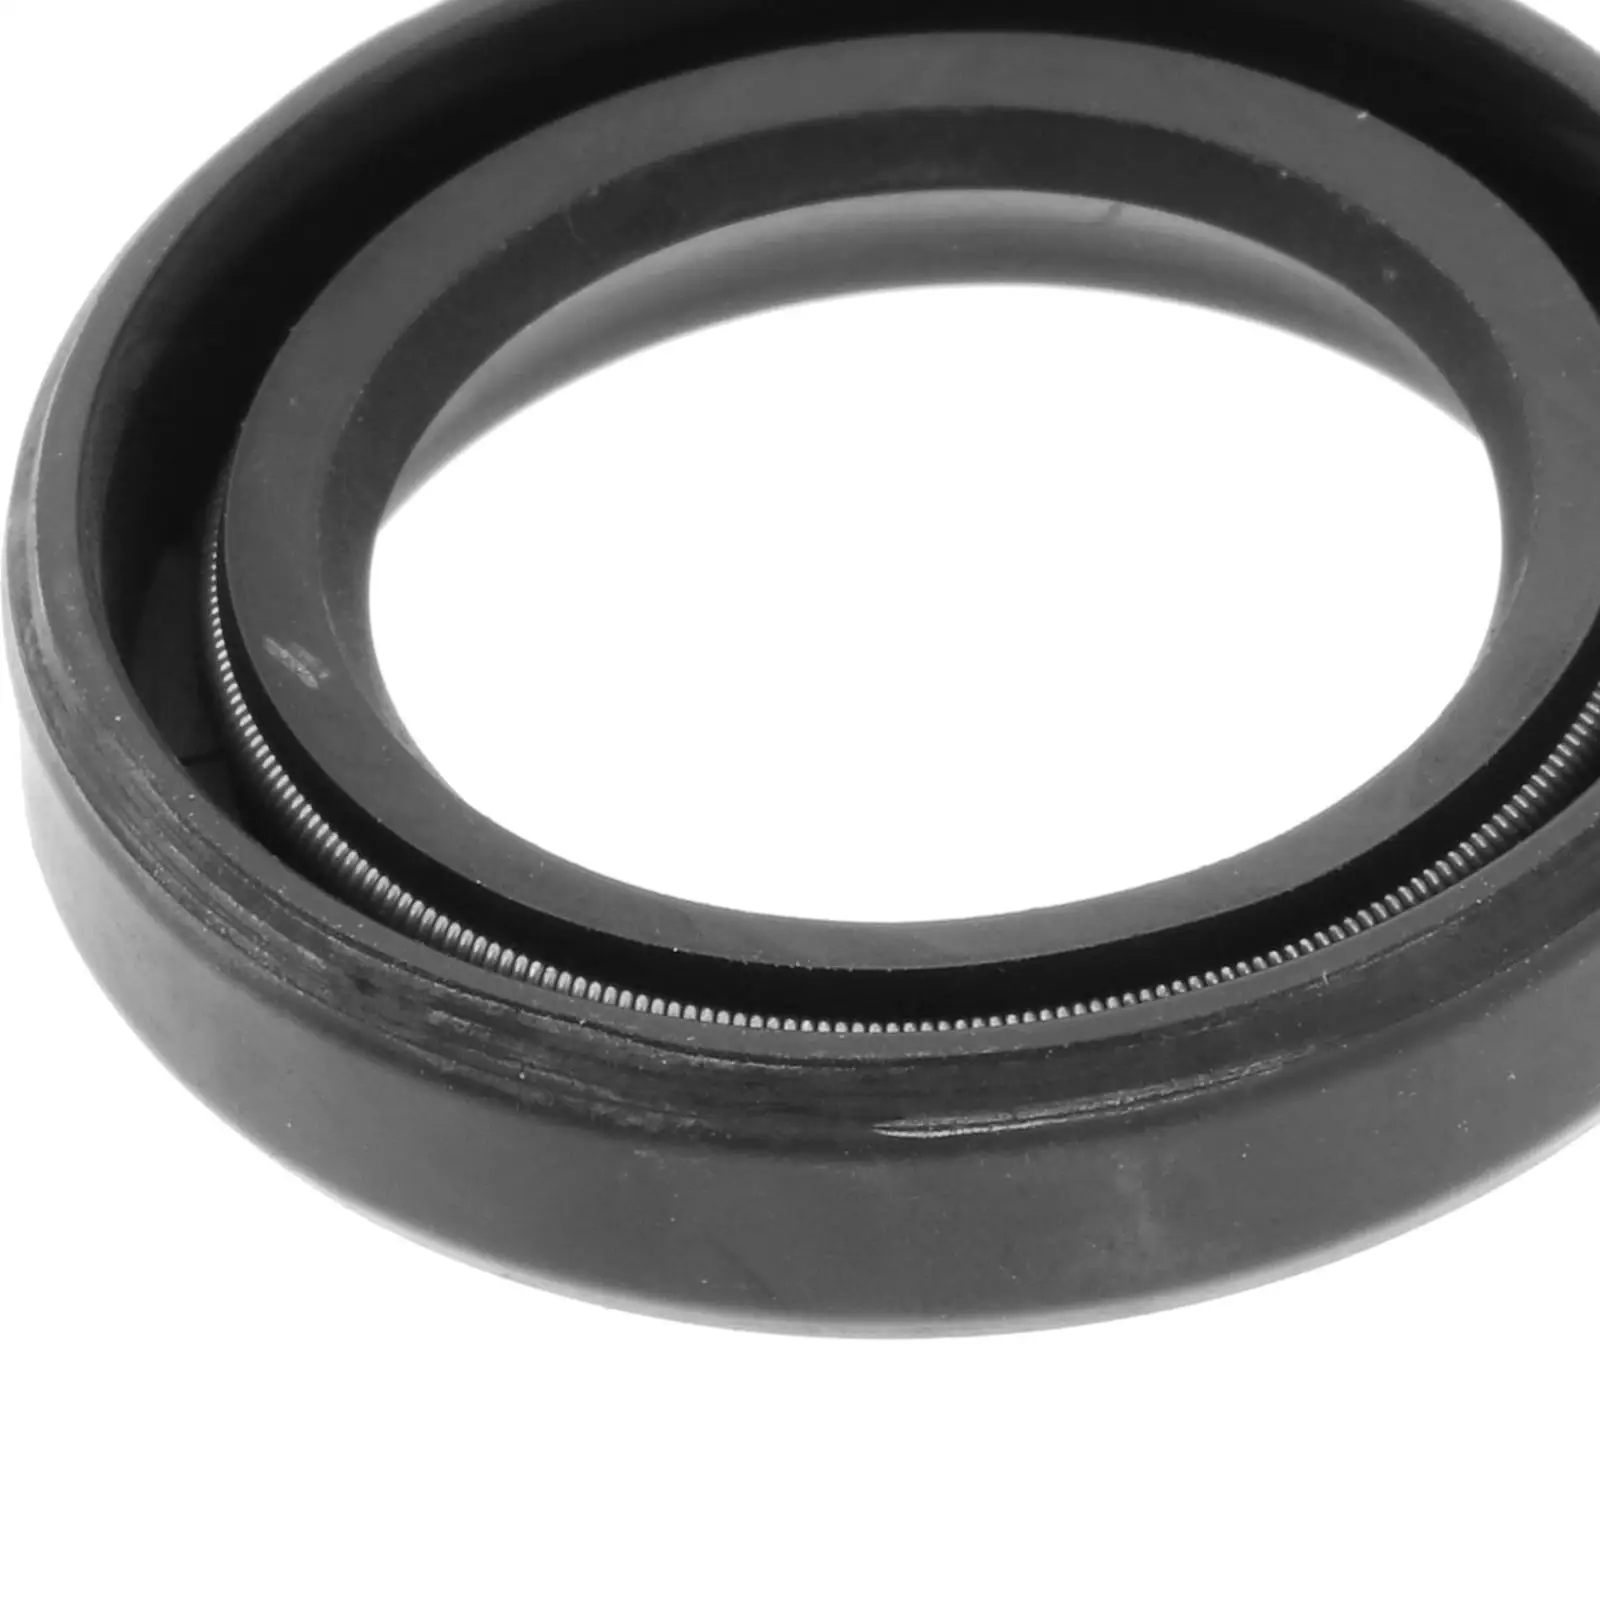 Oil Seal S-type Motocycle Accessory Replacements Parts for Yamaha Outboard